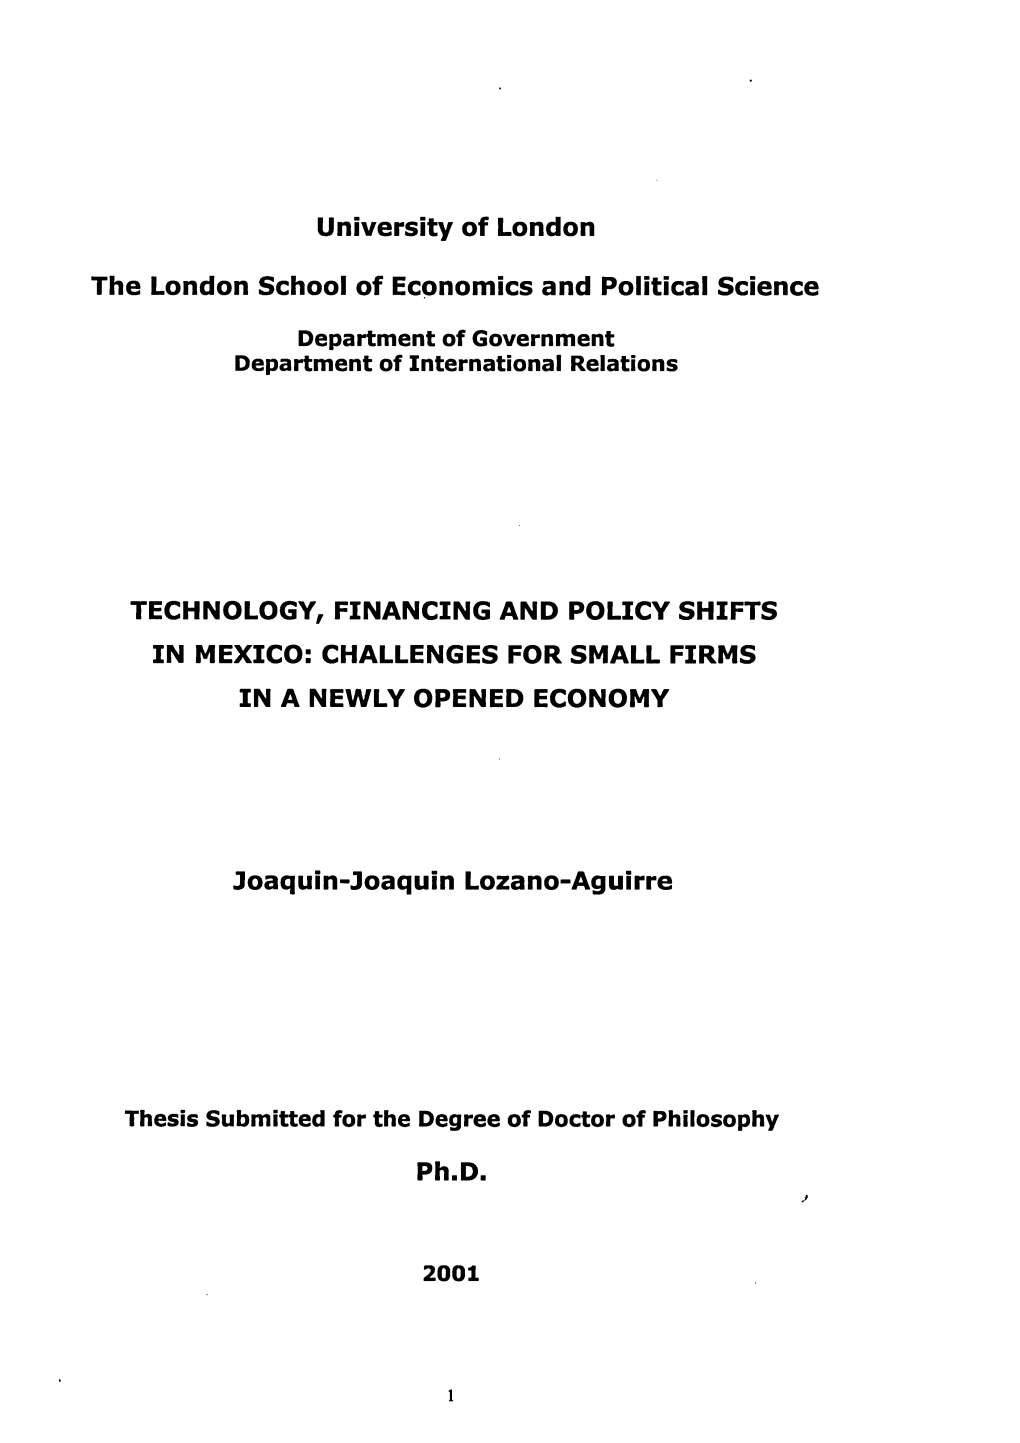 Technology, Financing and Policy Shifts in Mexico: Challenges for Small Firms in a Newly Opened Economy